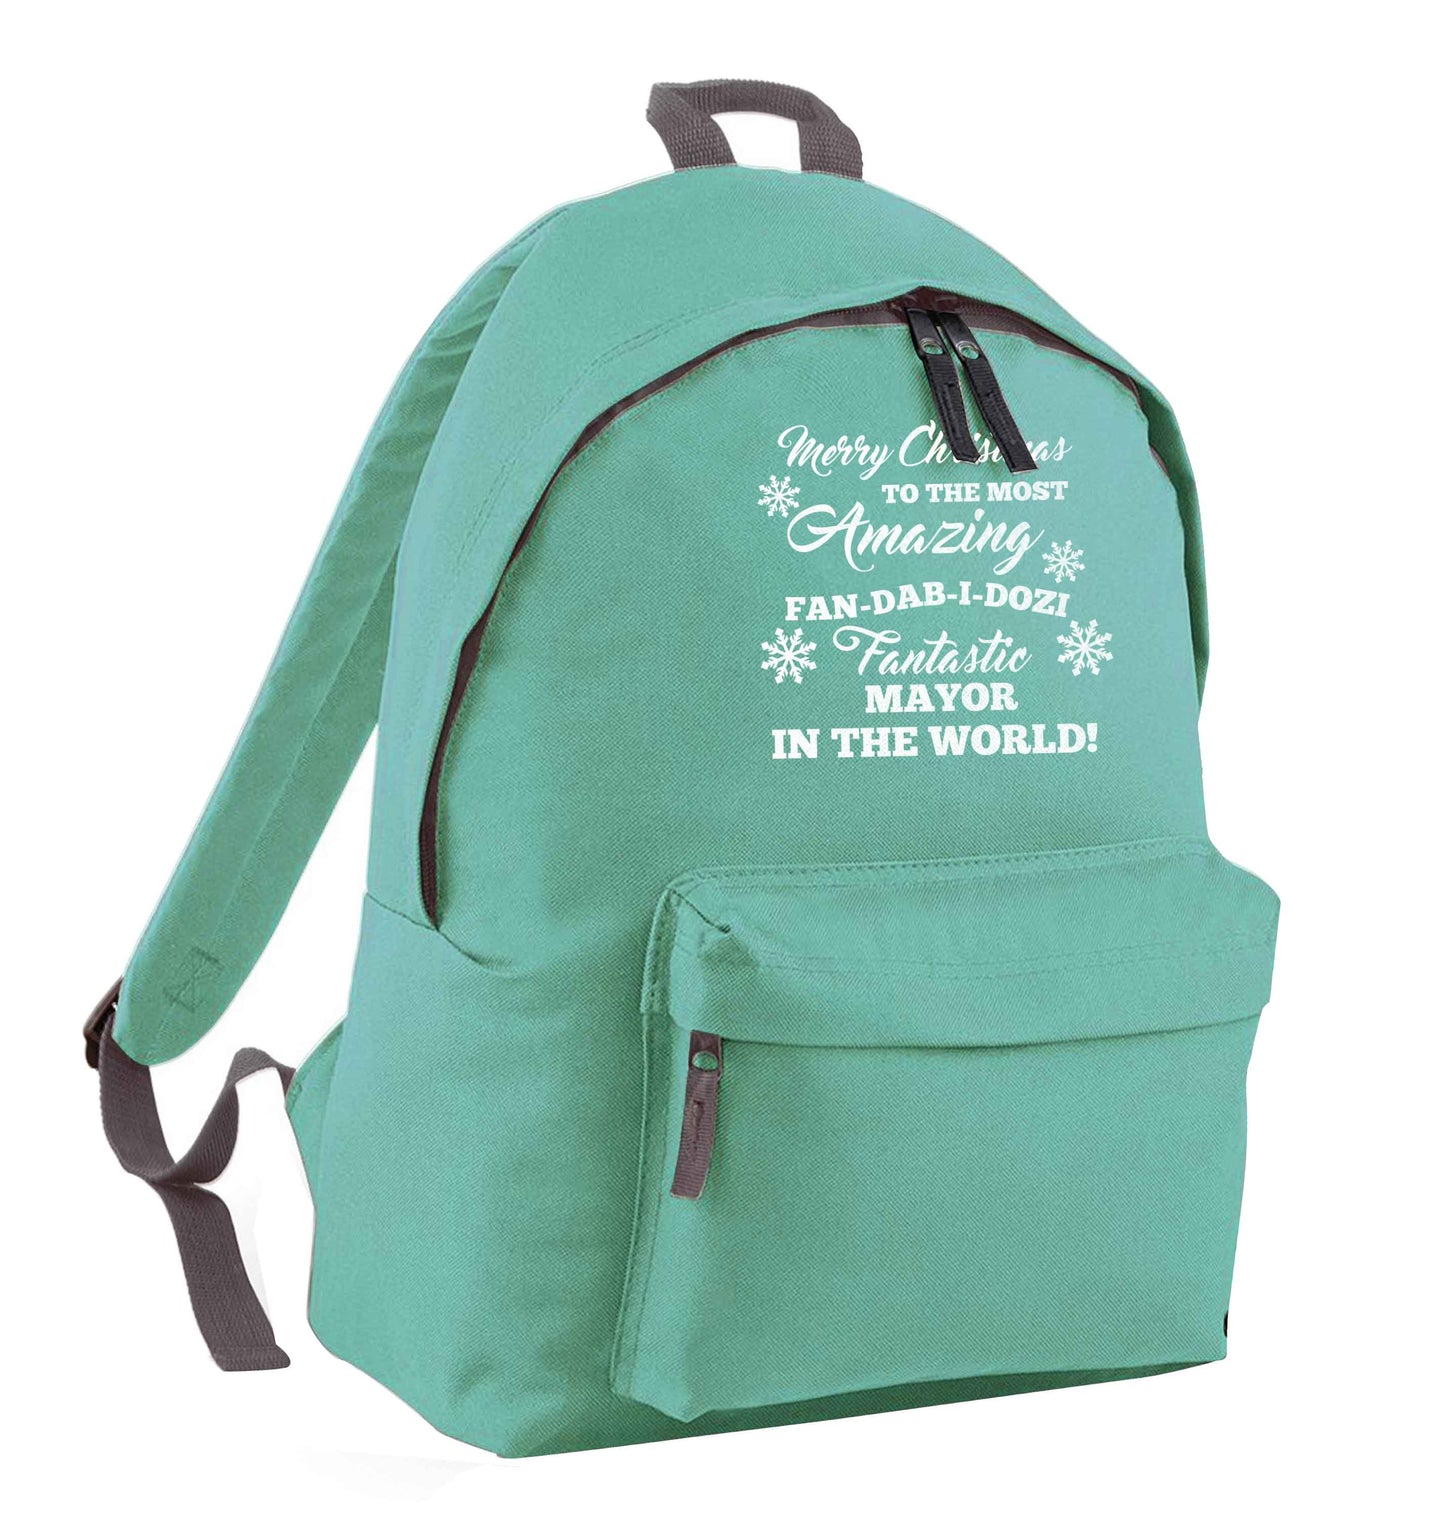 Merry Christmas to the most amazing fireman in the world! mint adults backpack